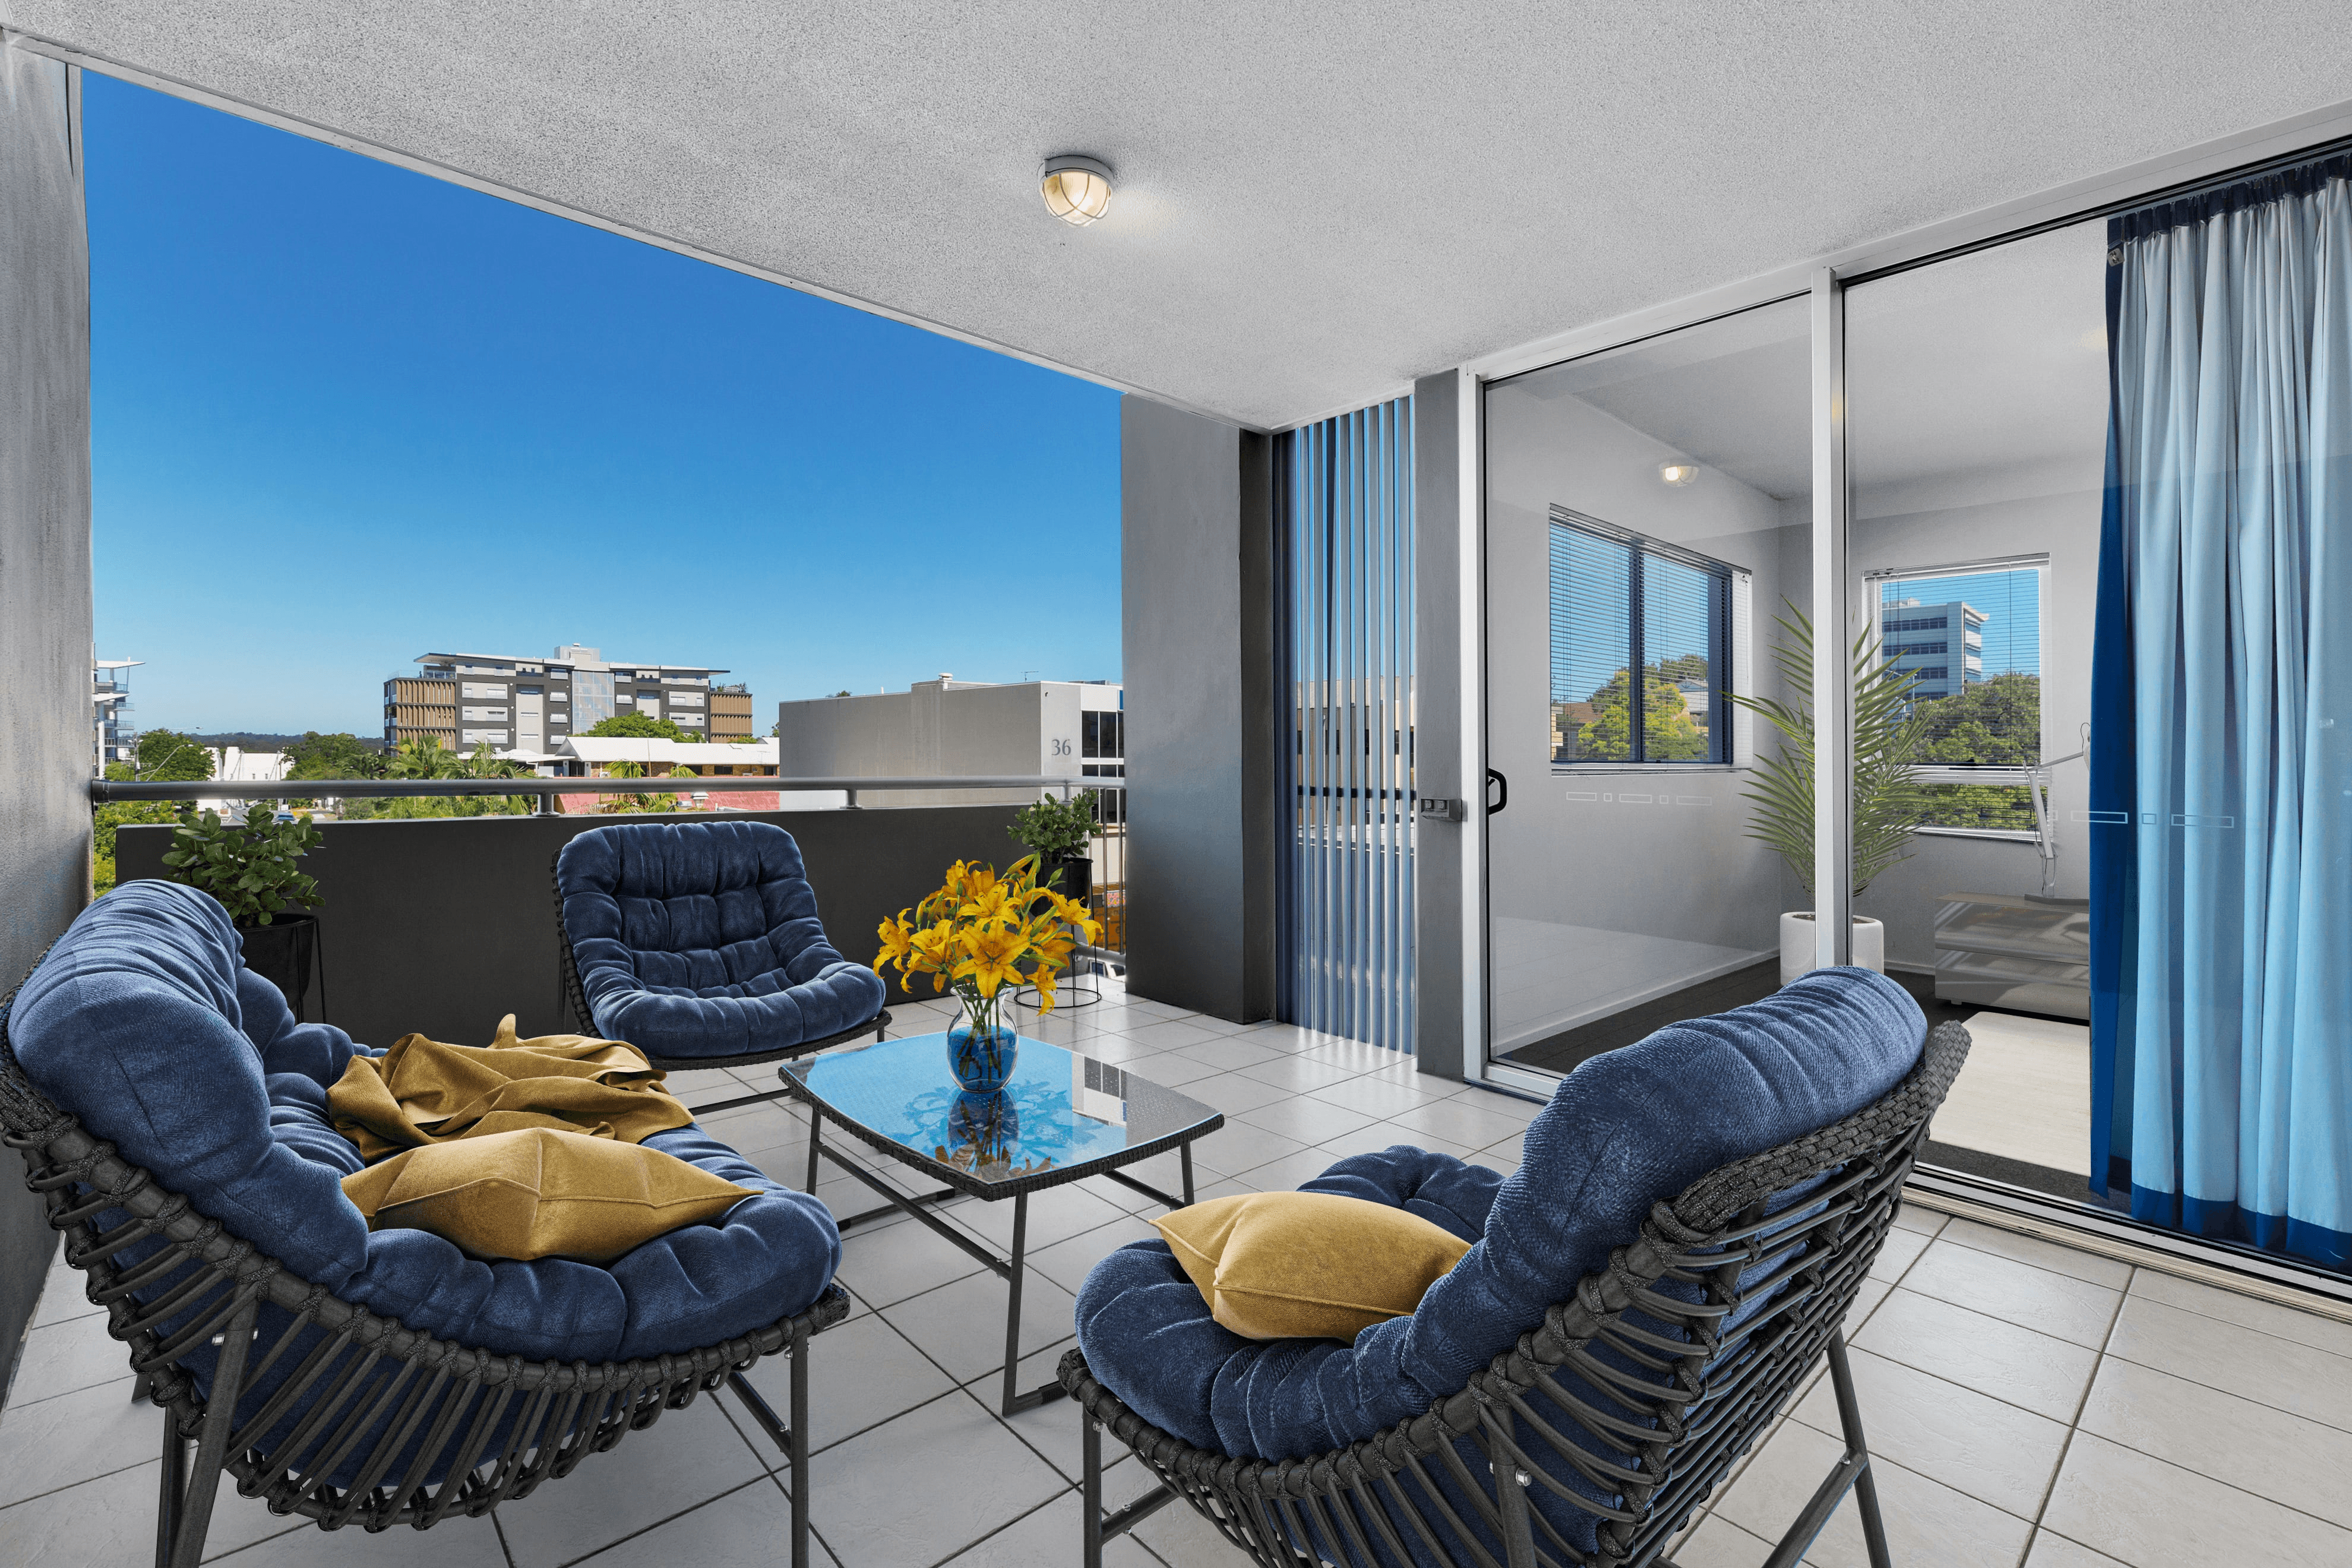 21/27 Station Road, INDOOROOPILLY, QLD 4068